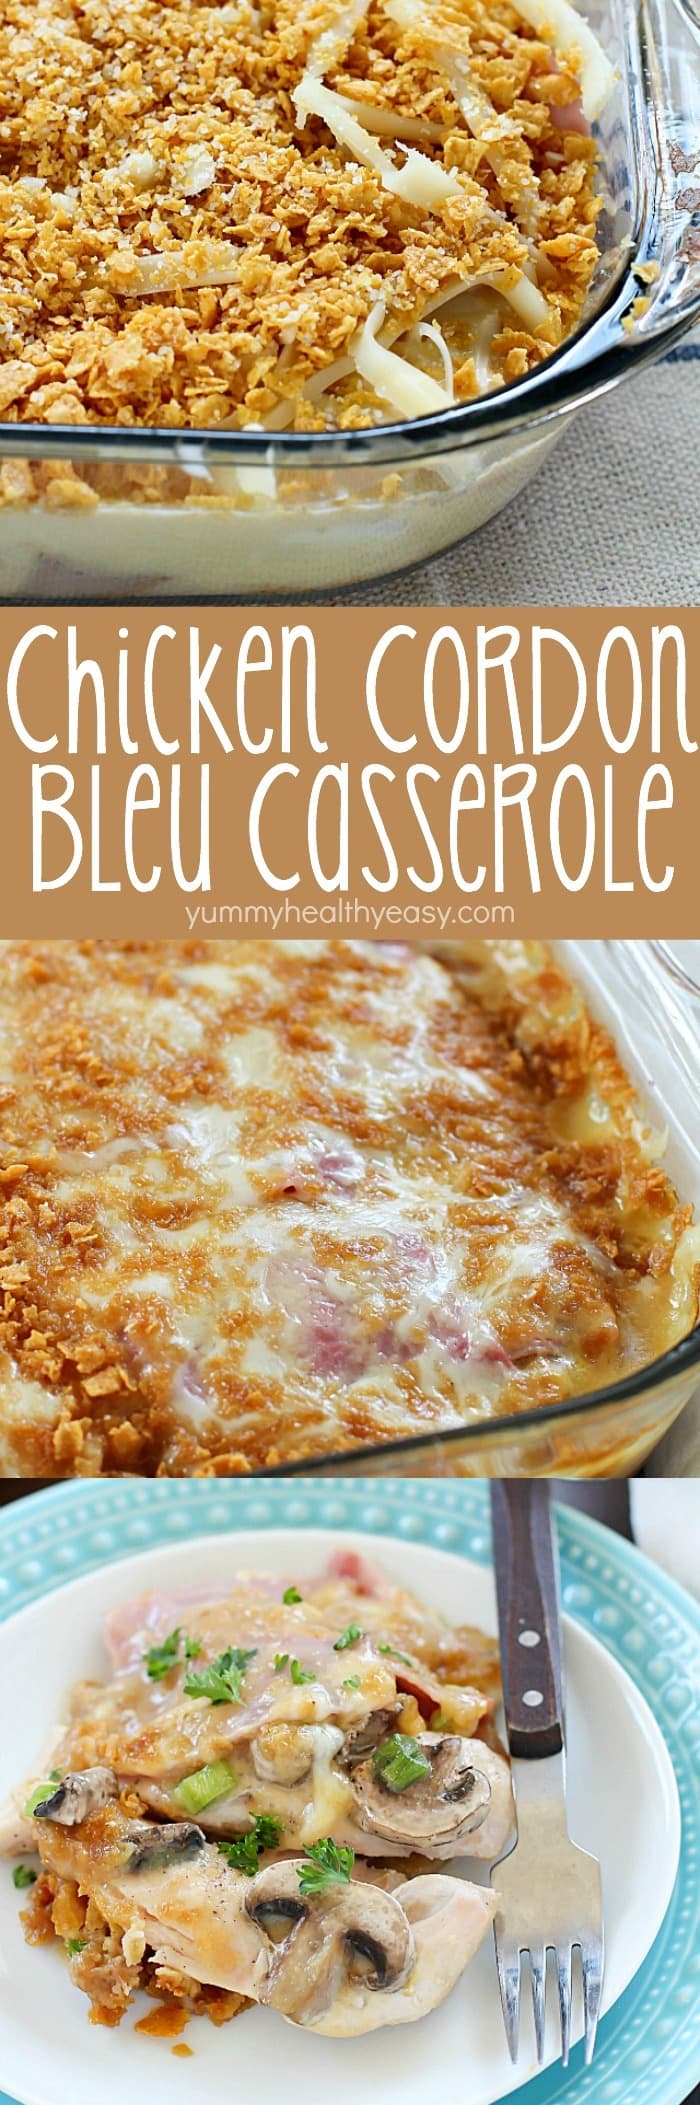 Chicken Cordon Bleu Casserole is an easy dinner recipe, cooked in one pan! Just layer in one casserole dish and bake. So easy and so delicious! A great comfort food dinner for the whole family! AD